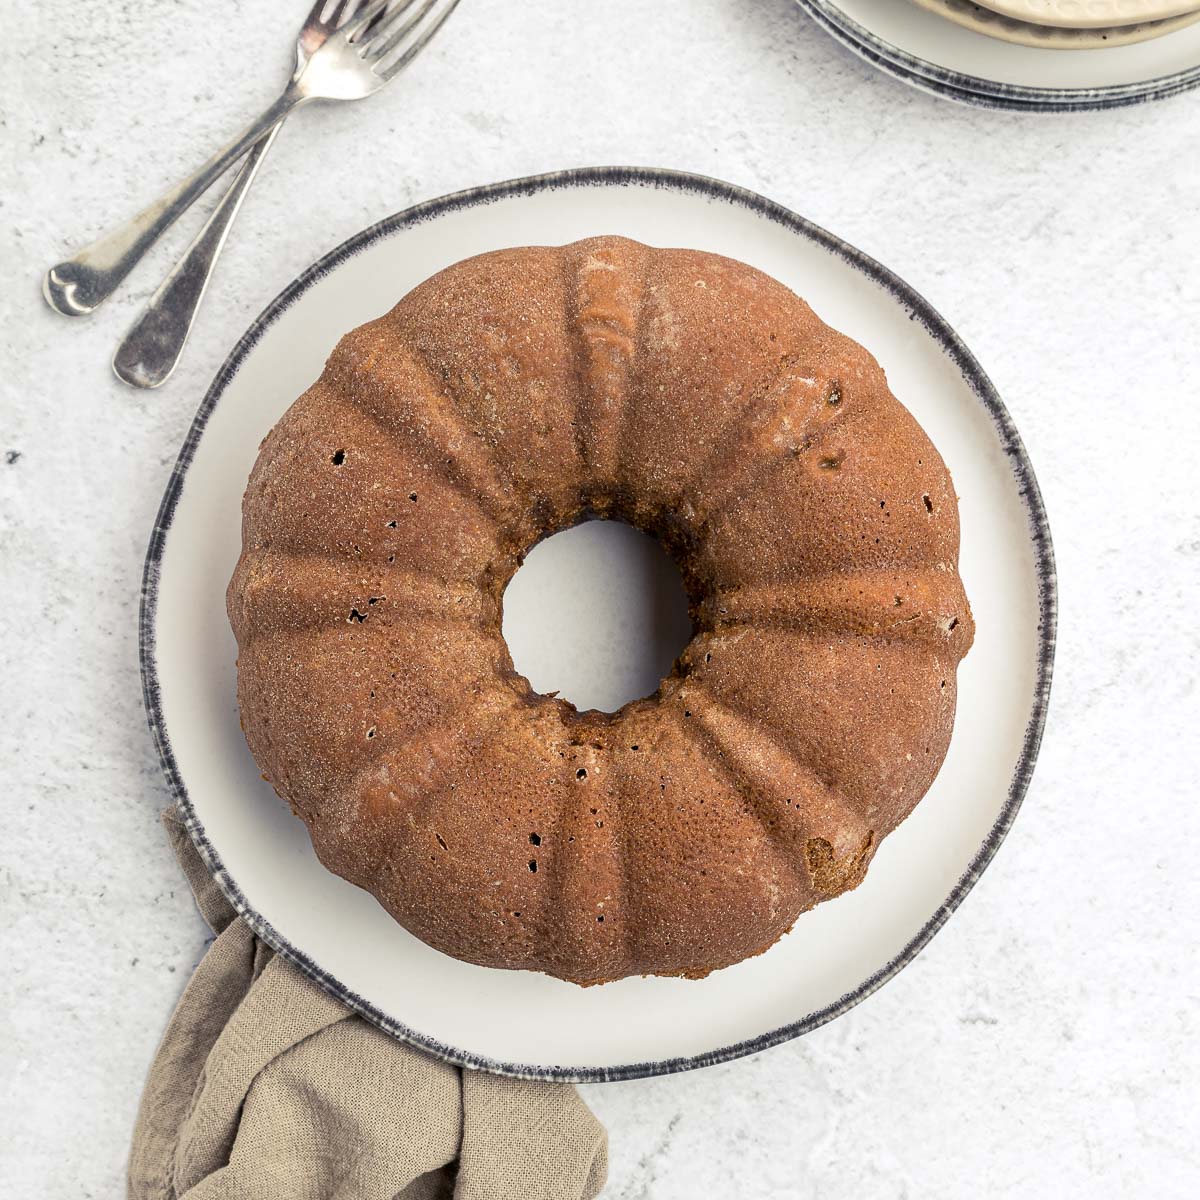 cooled orange gingerbread cake on a plate